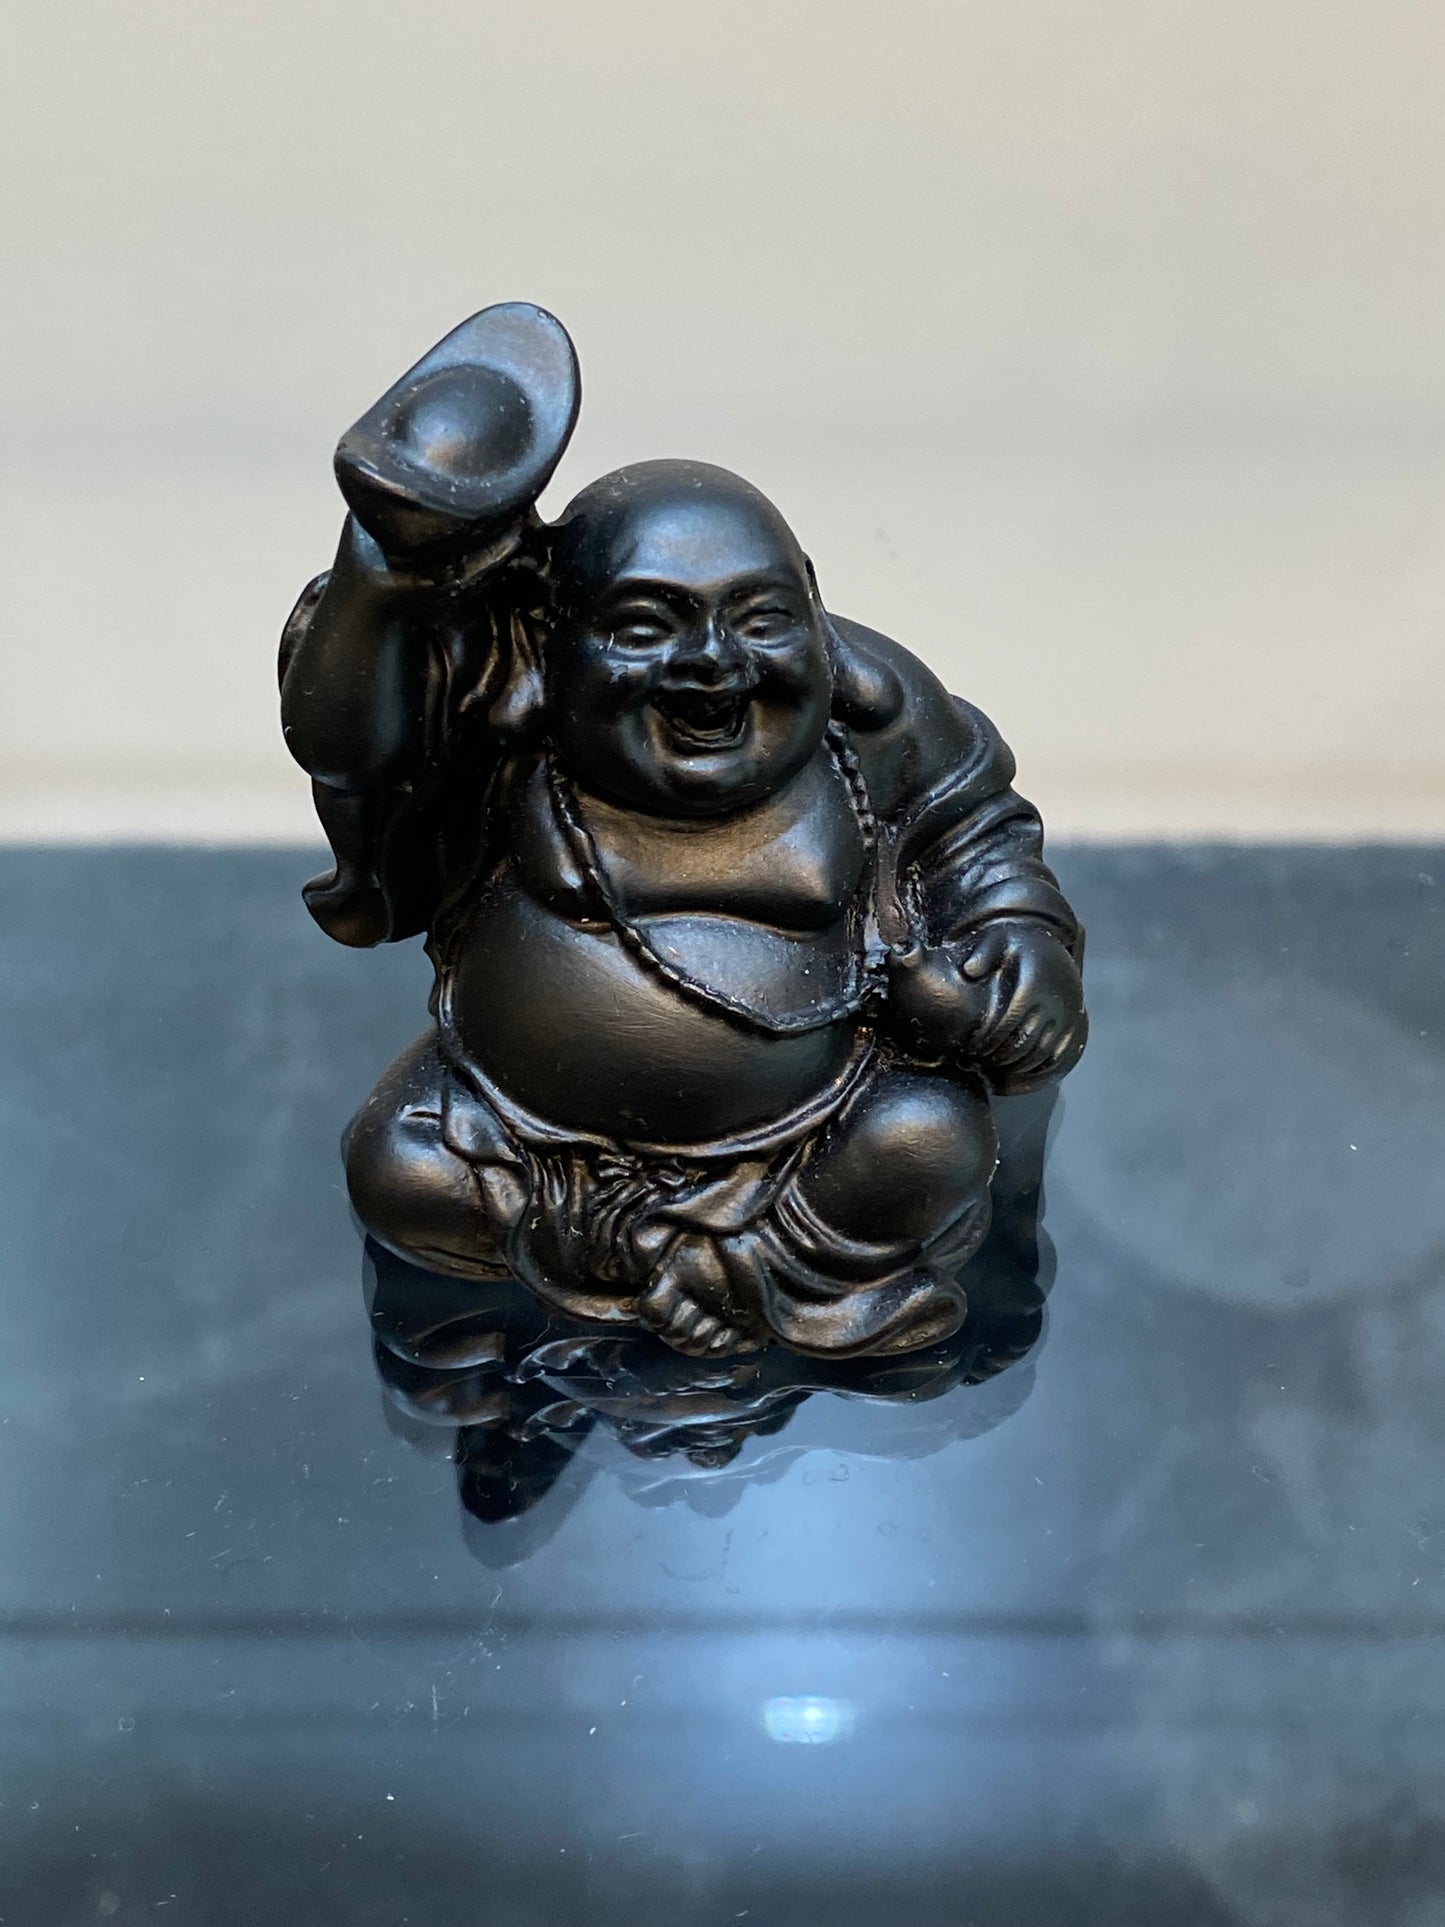 Black Laughing Buddha with Ingot and Gourd in his hands a symbol of abundance